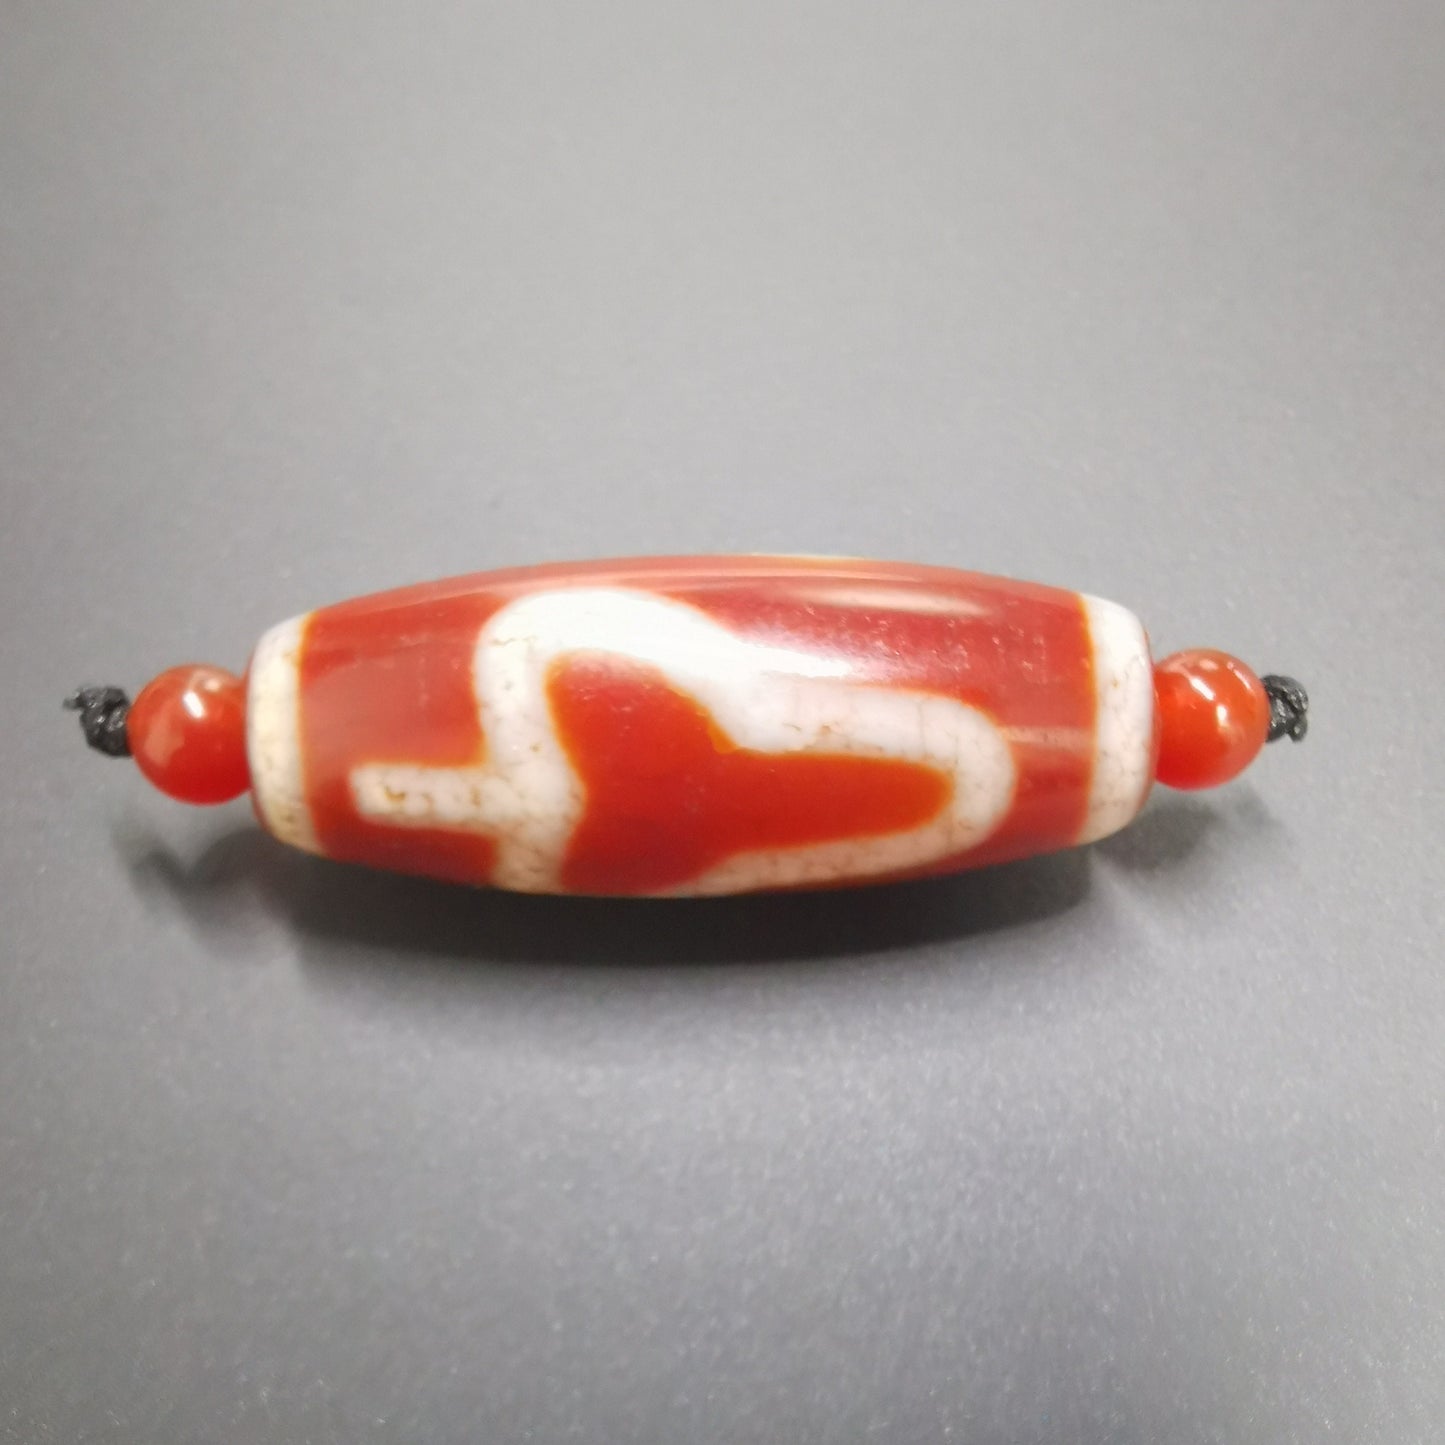 Fire Agate Bodhi Bead,30 Years Old